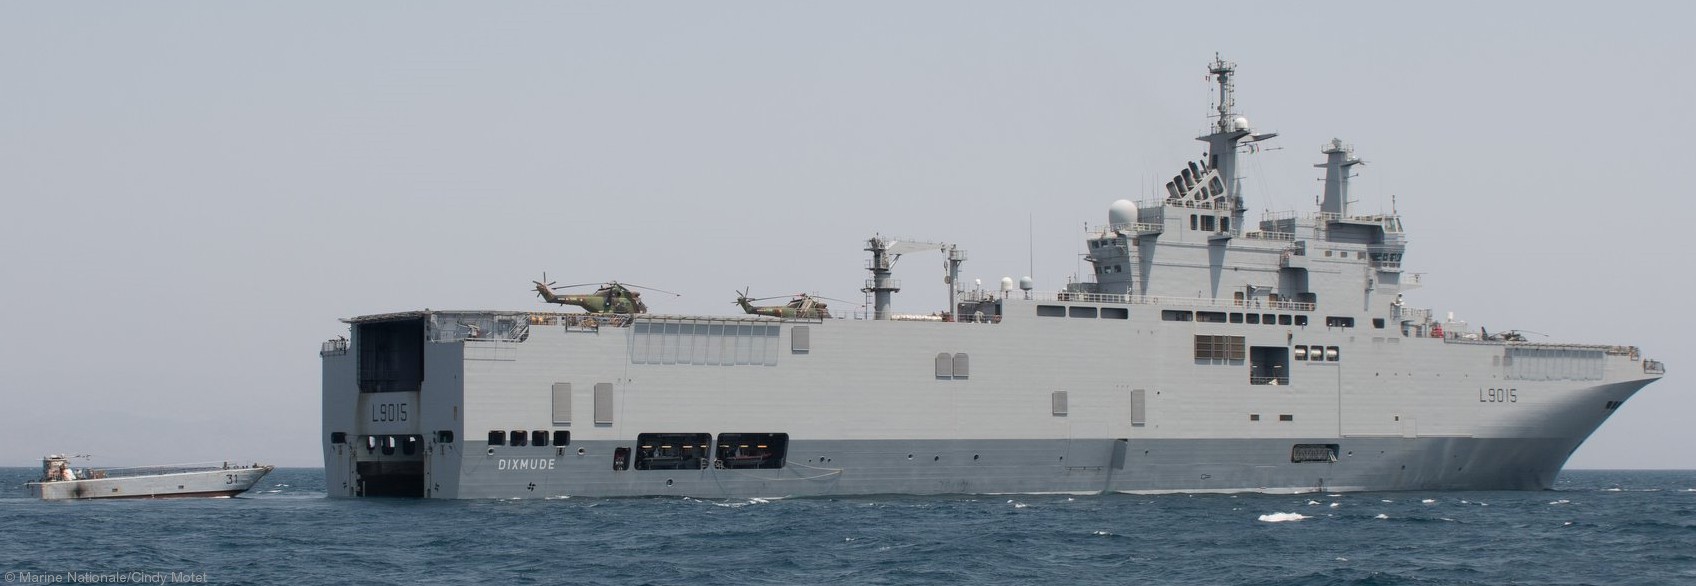 l-9015 fs dixmude mistral class amphibious assault command ship bpc french navy marine nationale 14 well deck operations ctm lcu